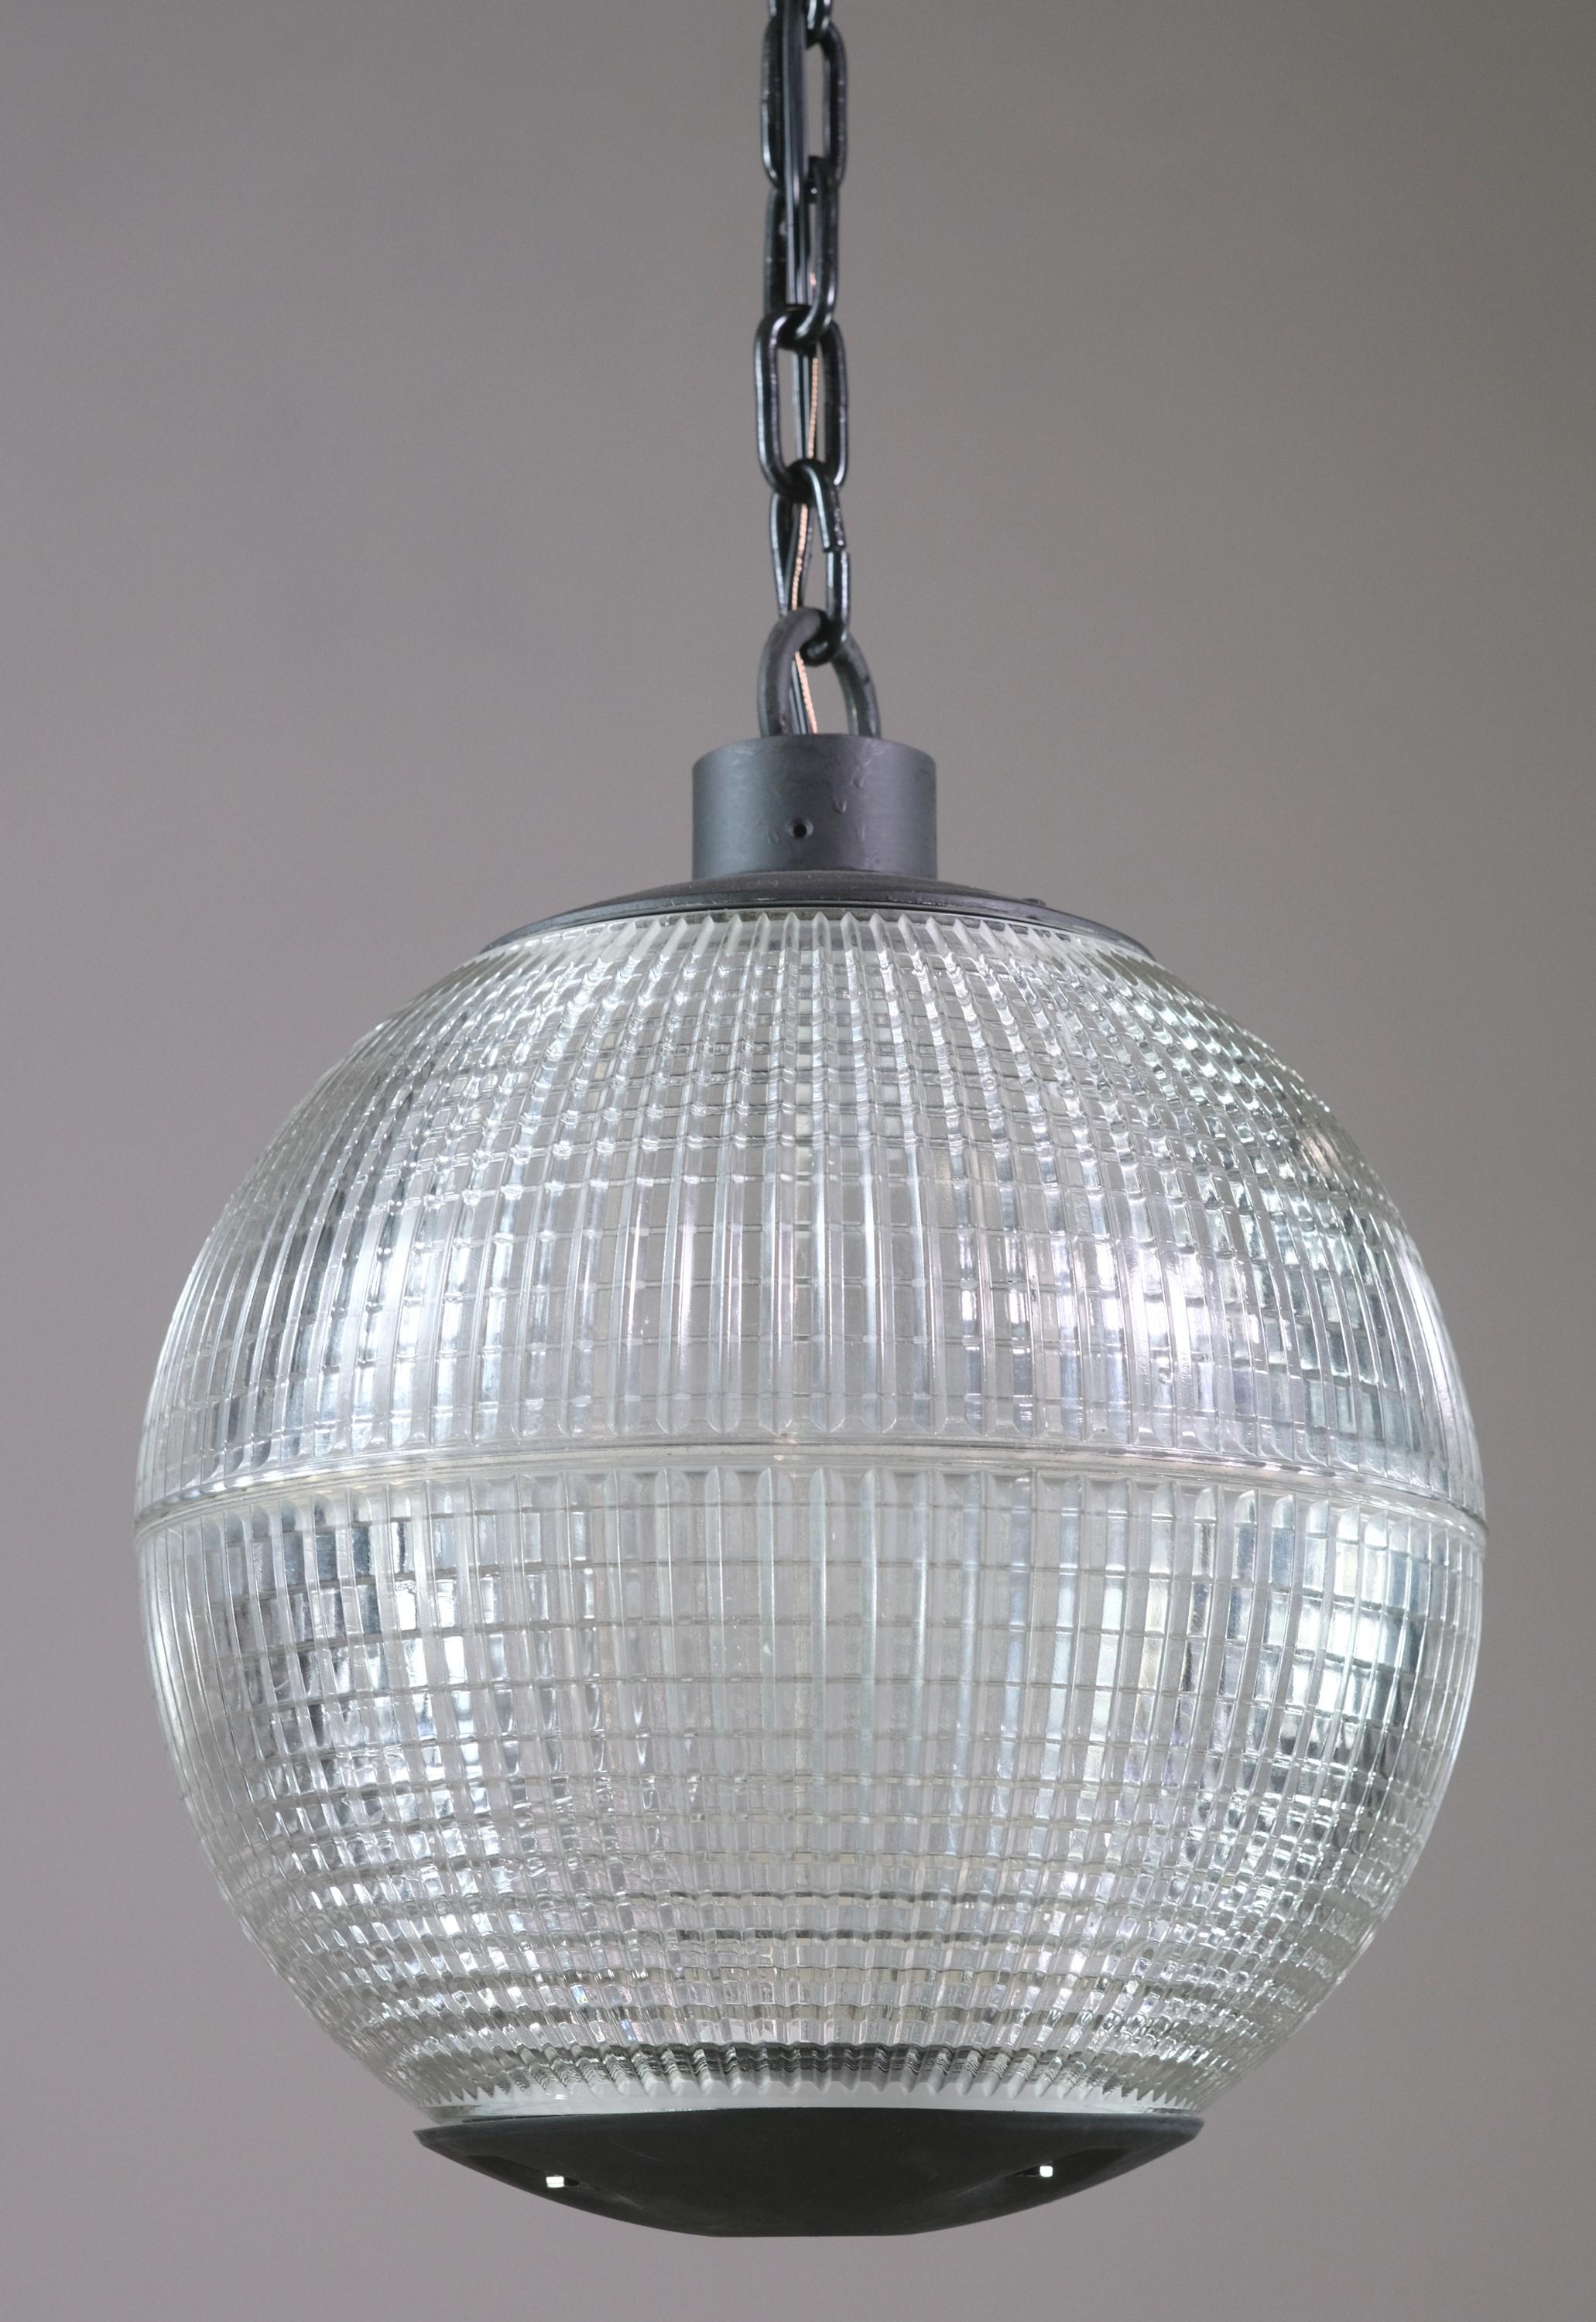 Modern 1960s French Holophane Pendant Street Light Reeded Glass Rewired for US